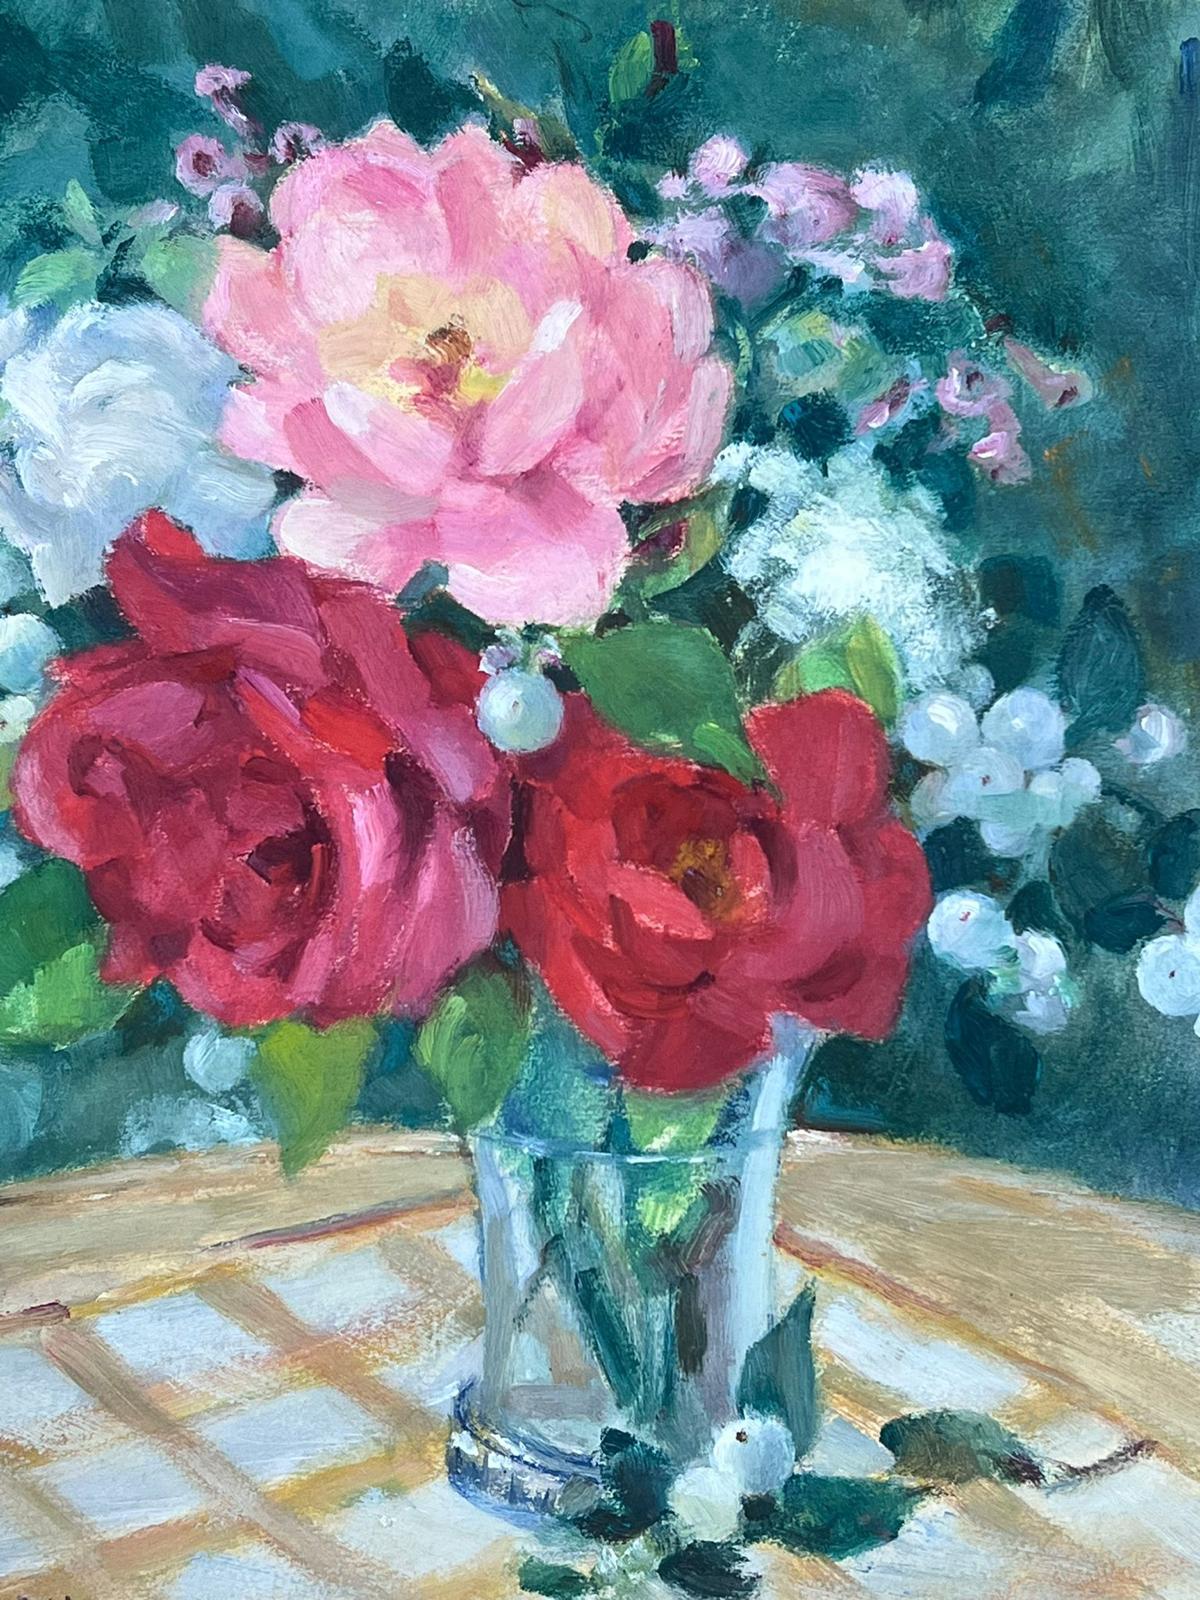 Roses
by Louise Alix (French, 1888-1980) *see notes below
provenance stamp to the back 
oil painting on artist paper, unframed
measures: 14.5 high by 12 inches wide
condition: overall very good and sound, a few scuffs and marks to the surface and